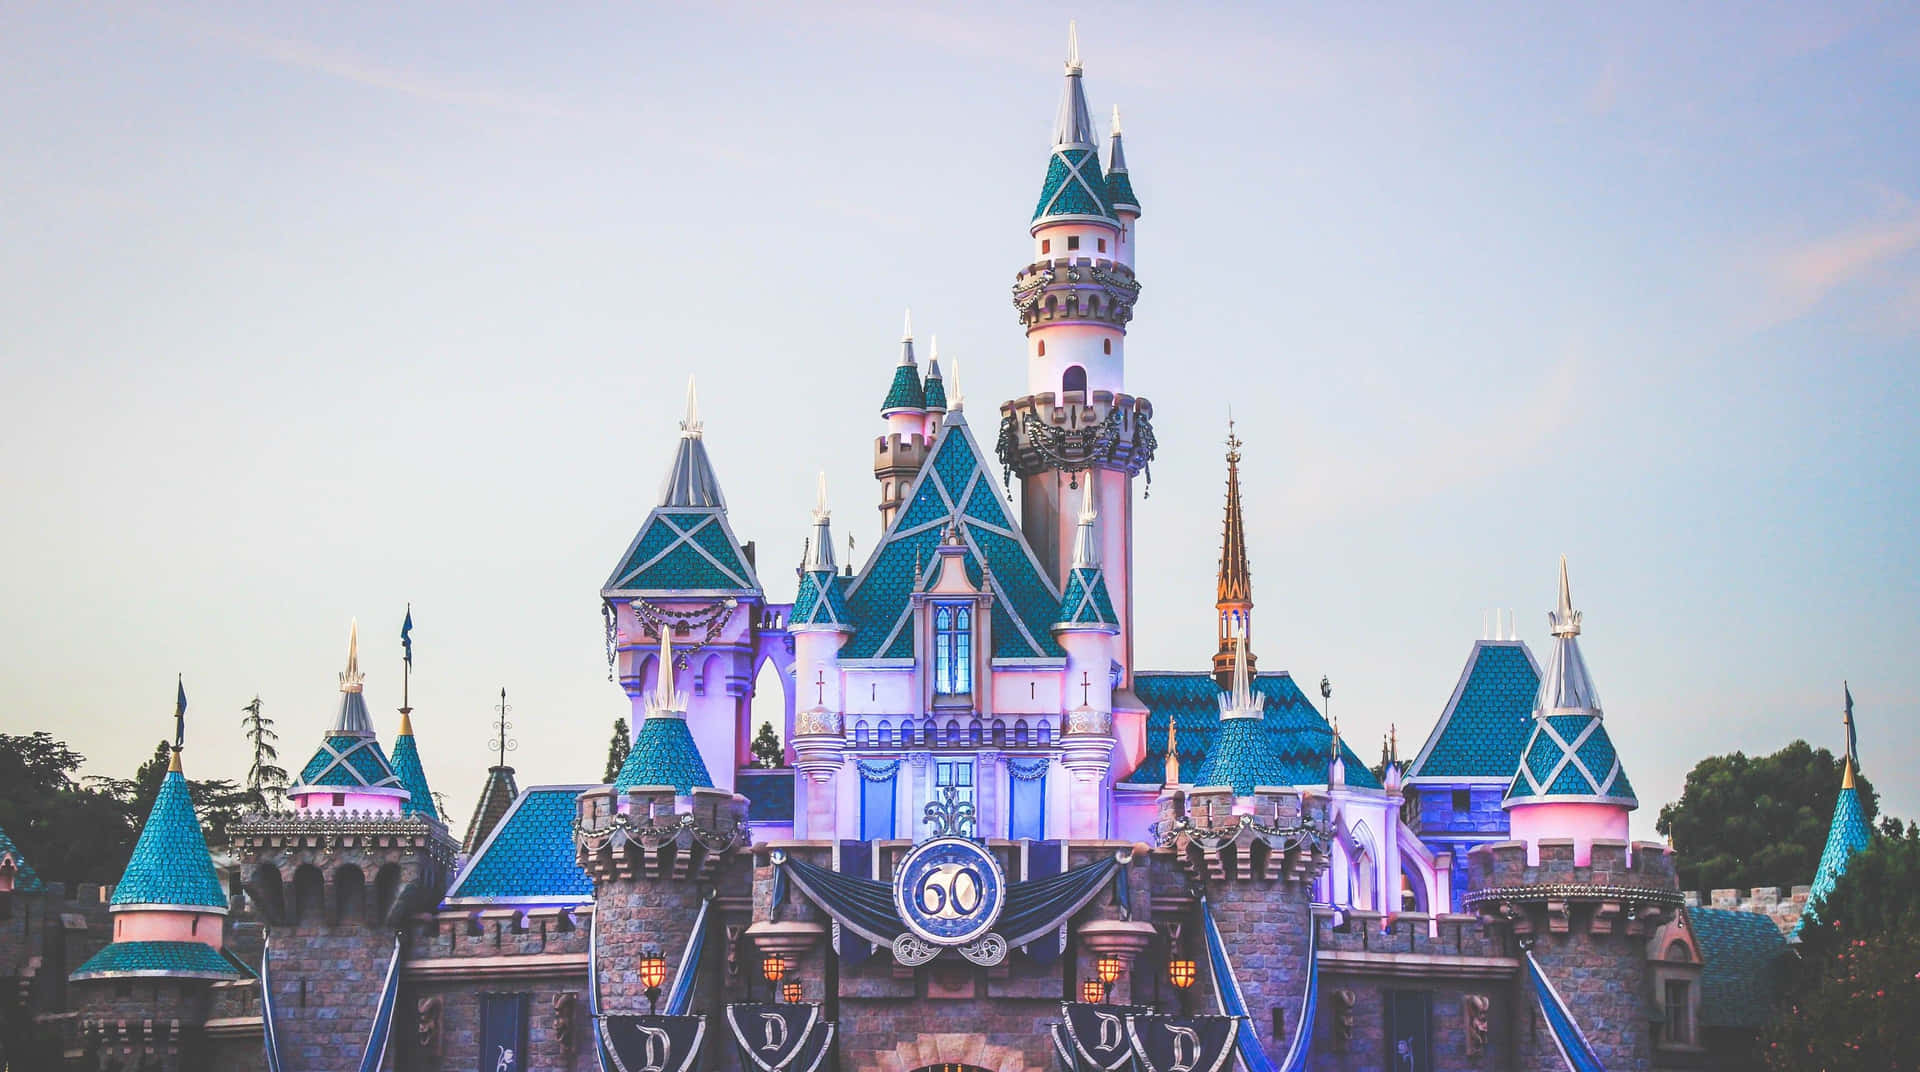 Let your dreams take you to majestic castle